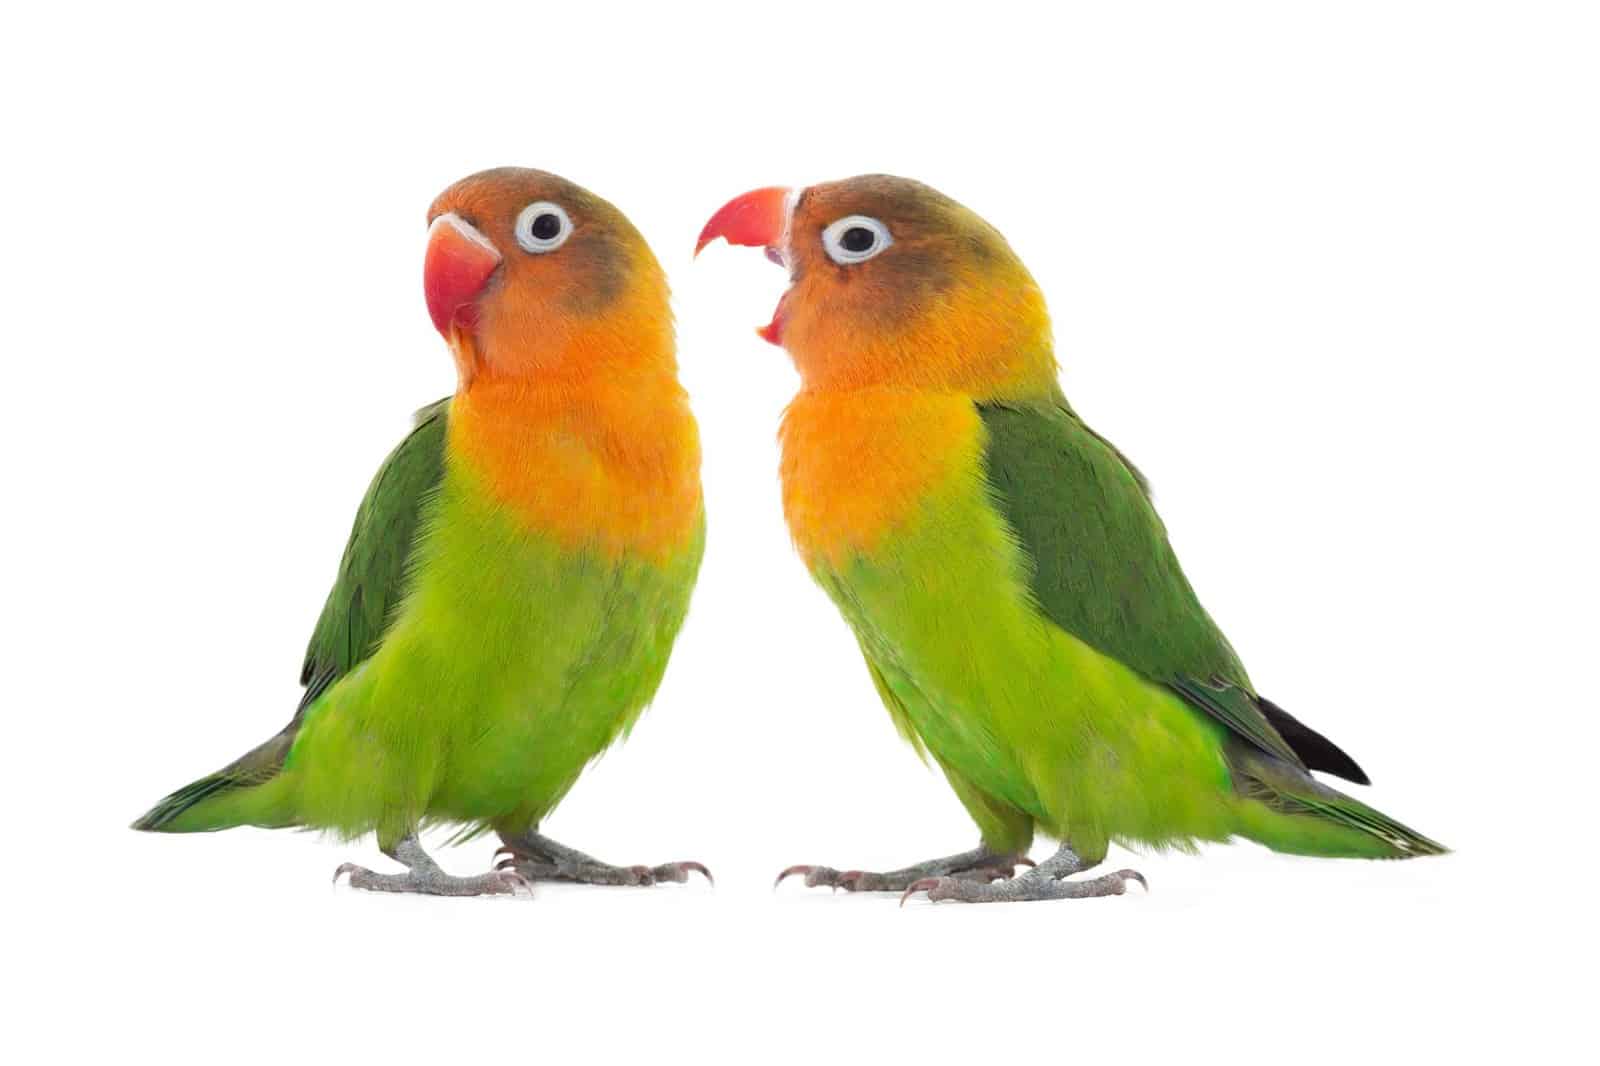 The Different Lovebird Colors explained at petrestart.com.